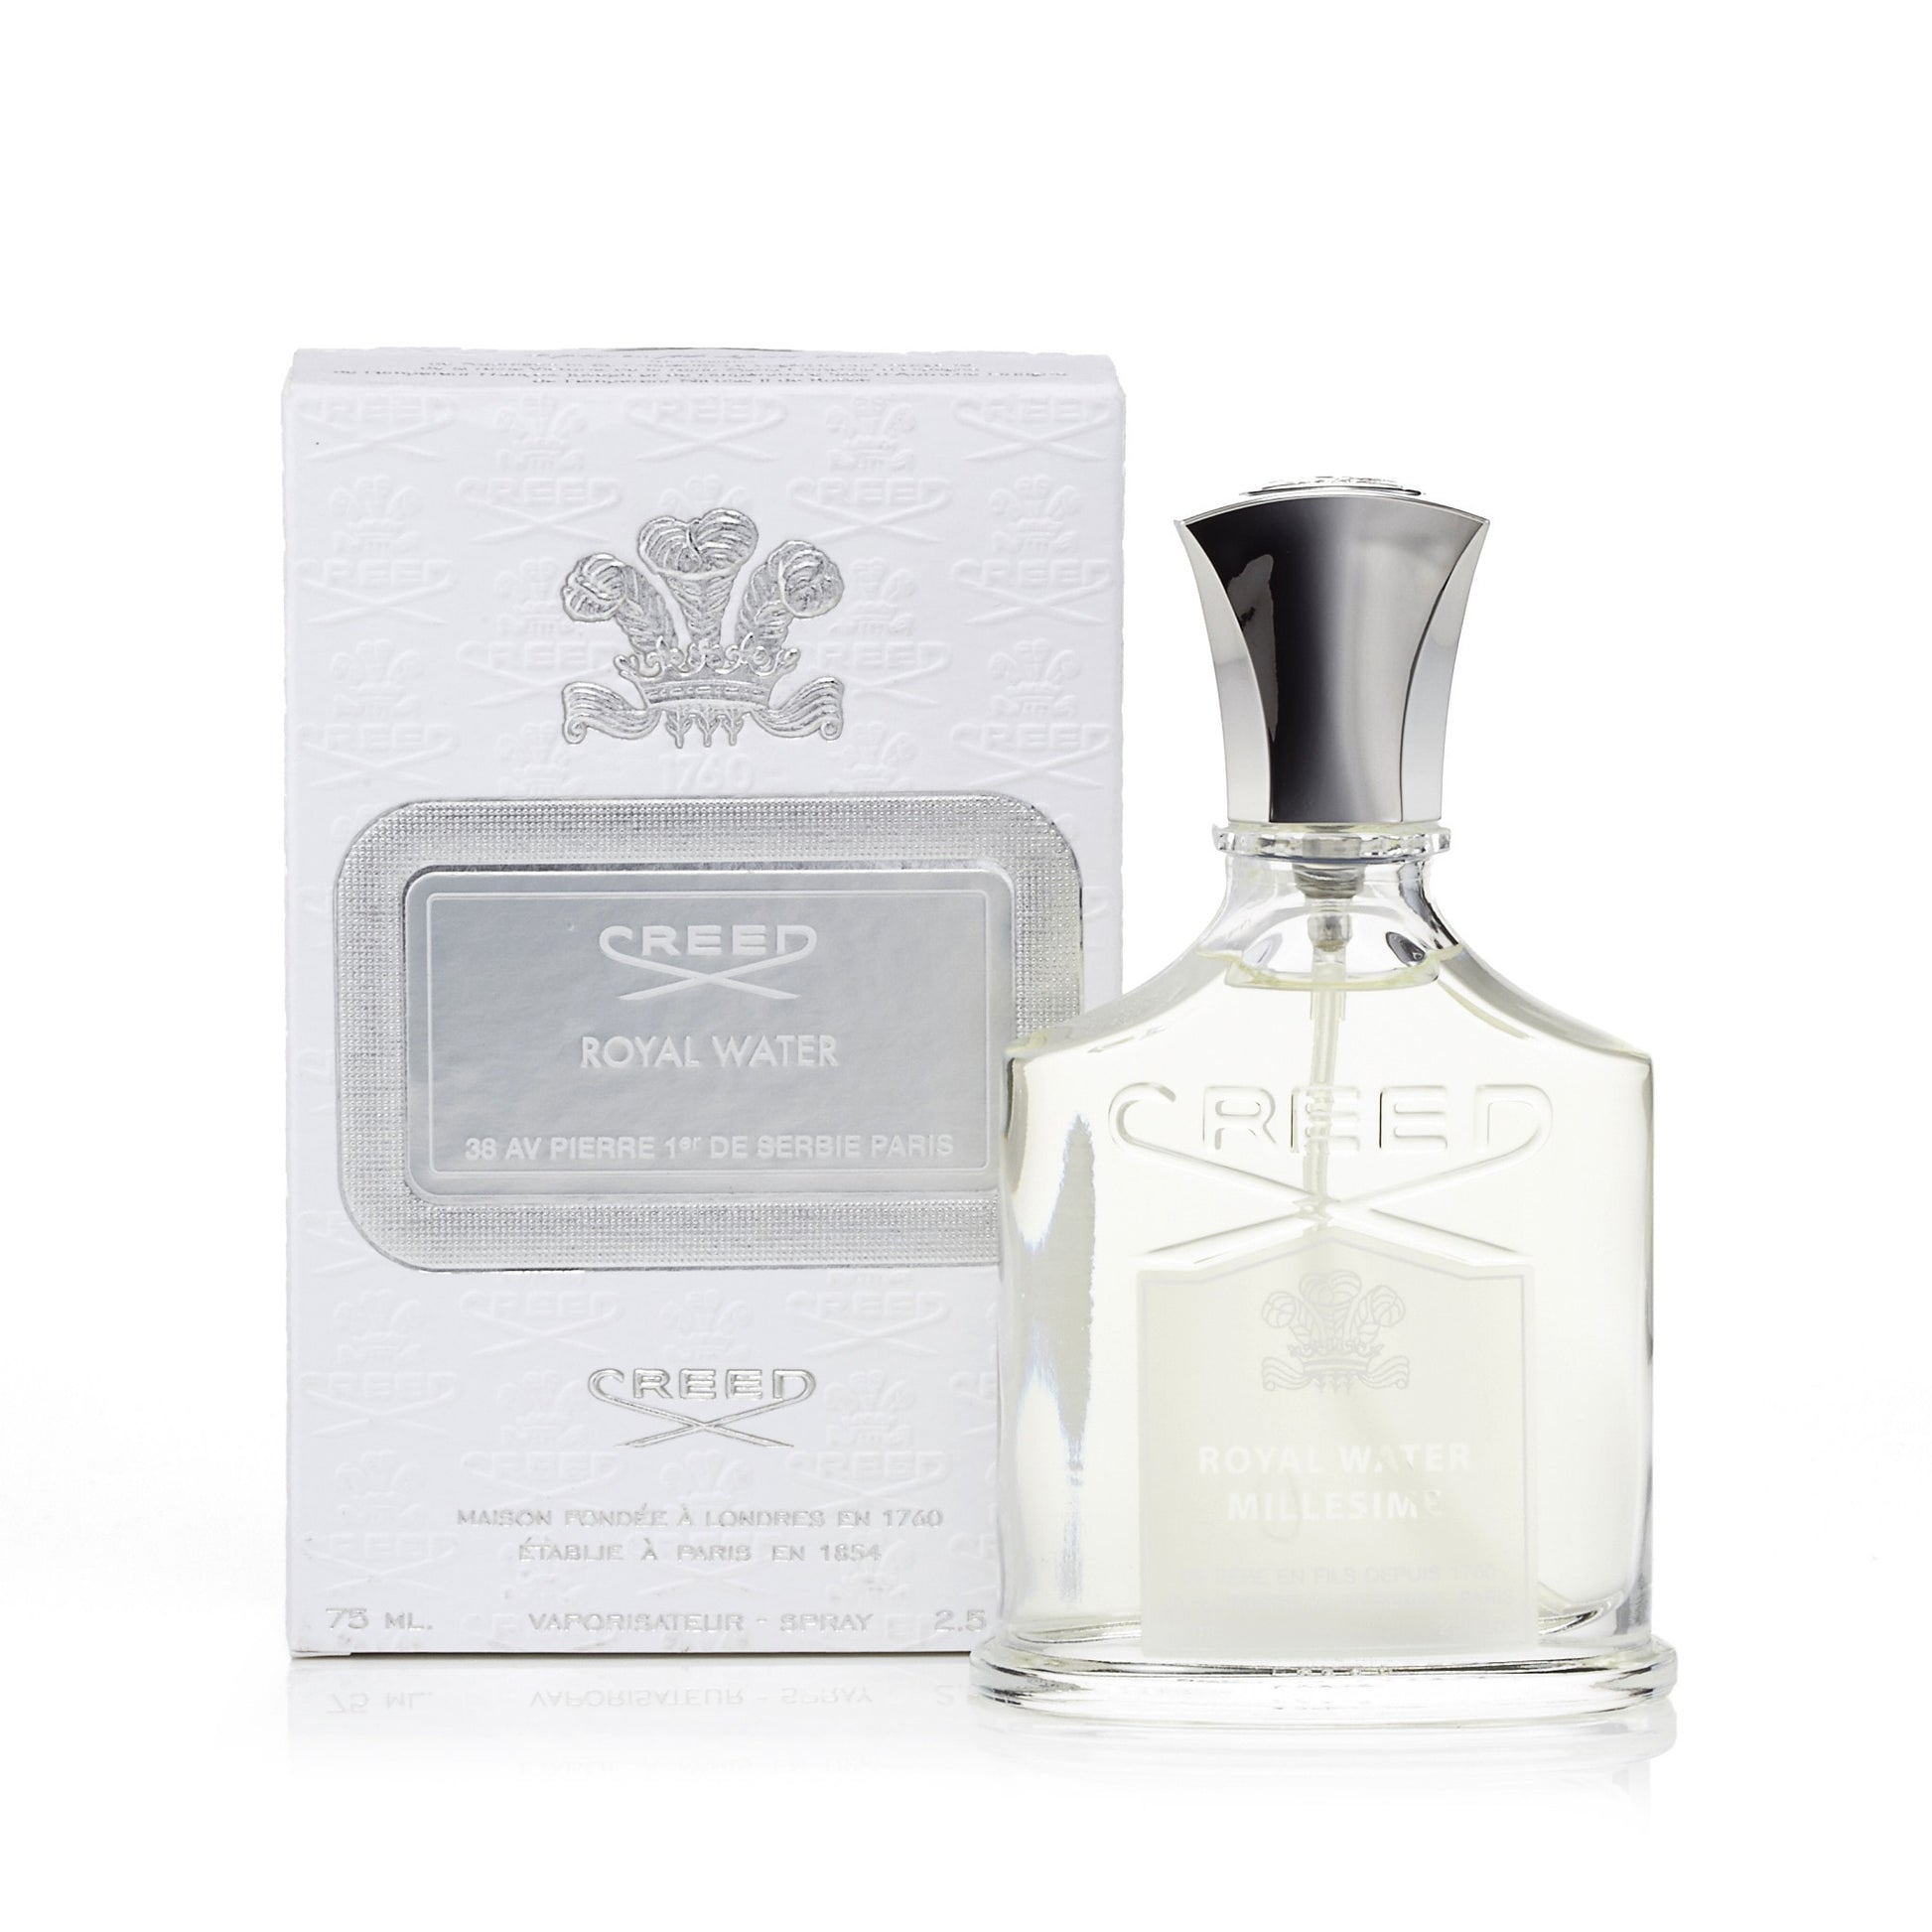 Royal Water Eau de Parfum Spray for Men by Creed, Product image 1